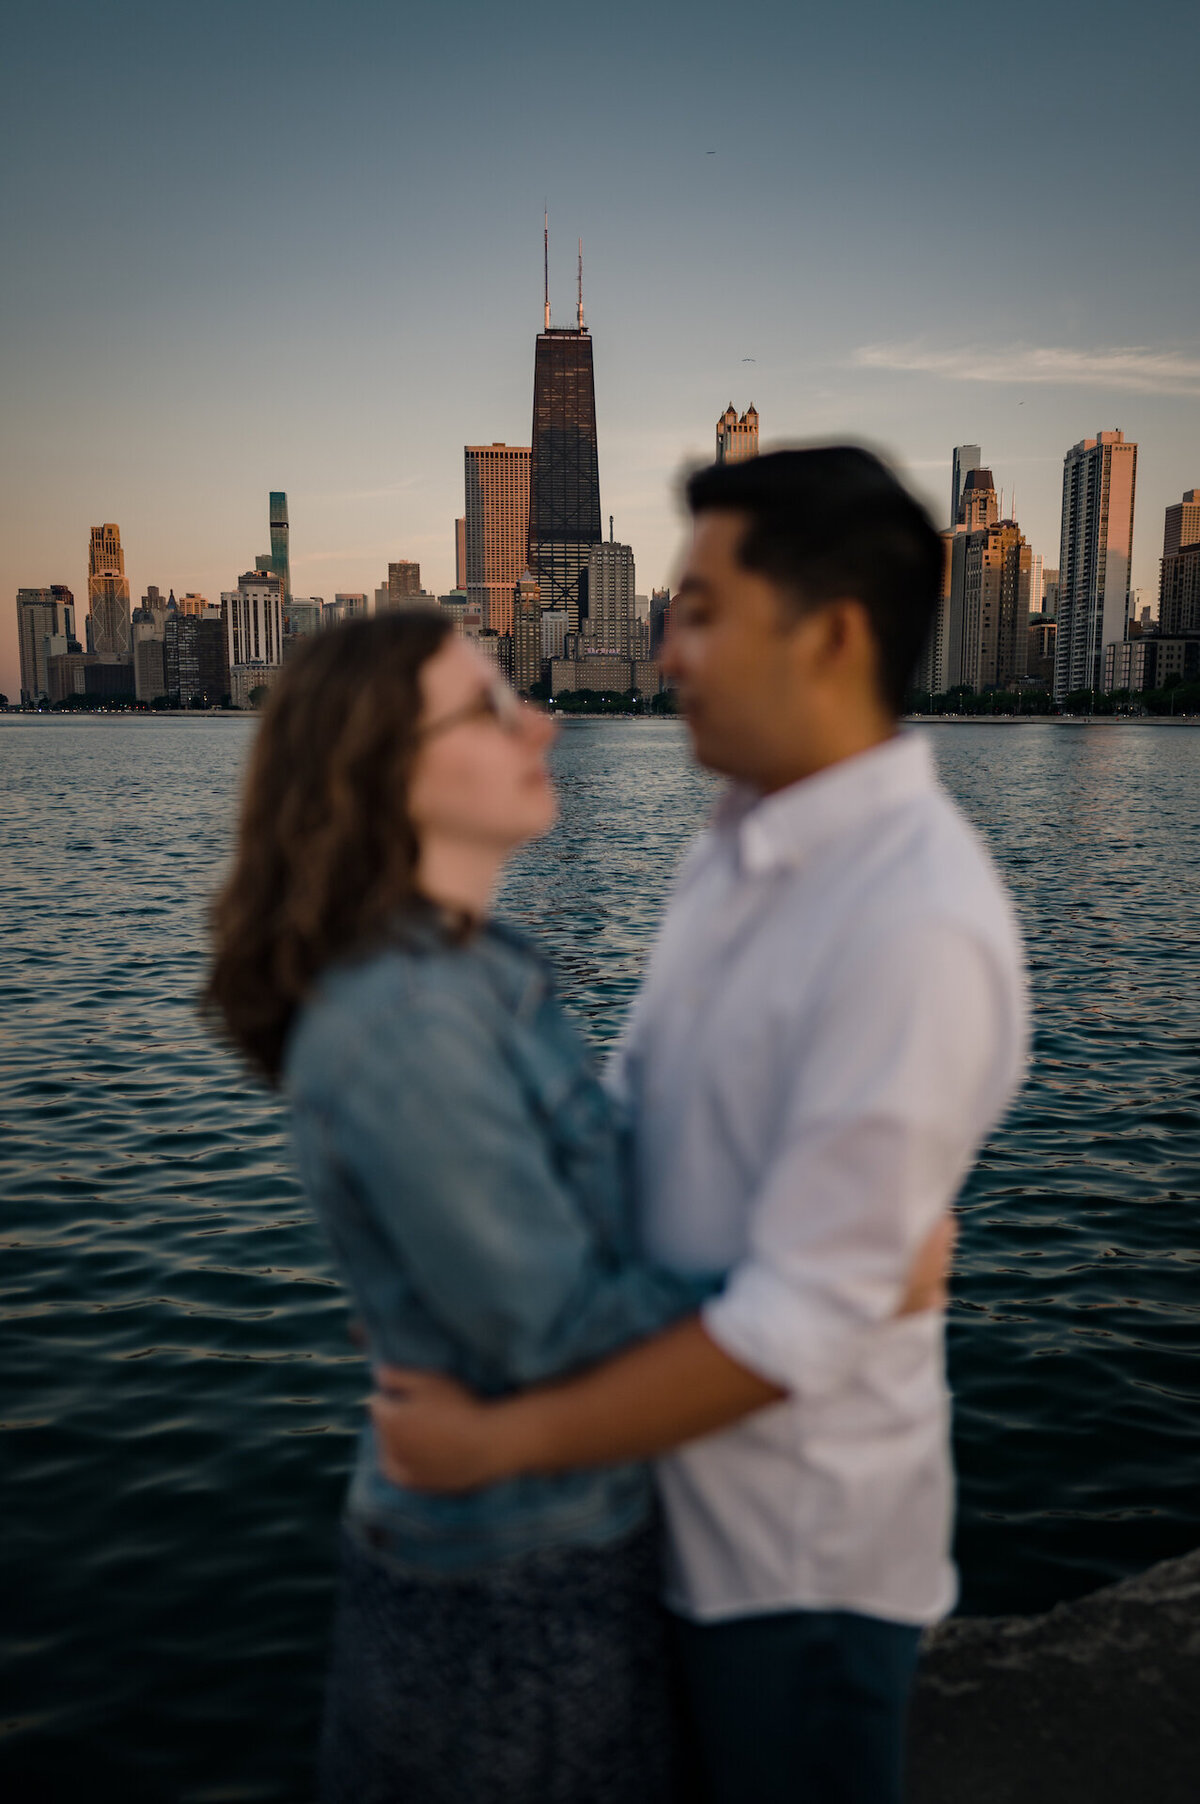 A couple embrace in front of the Chicago skyline